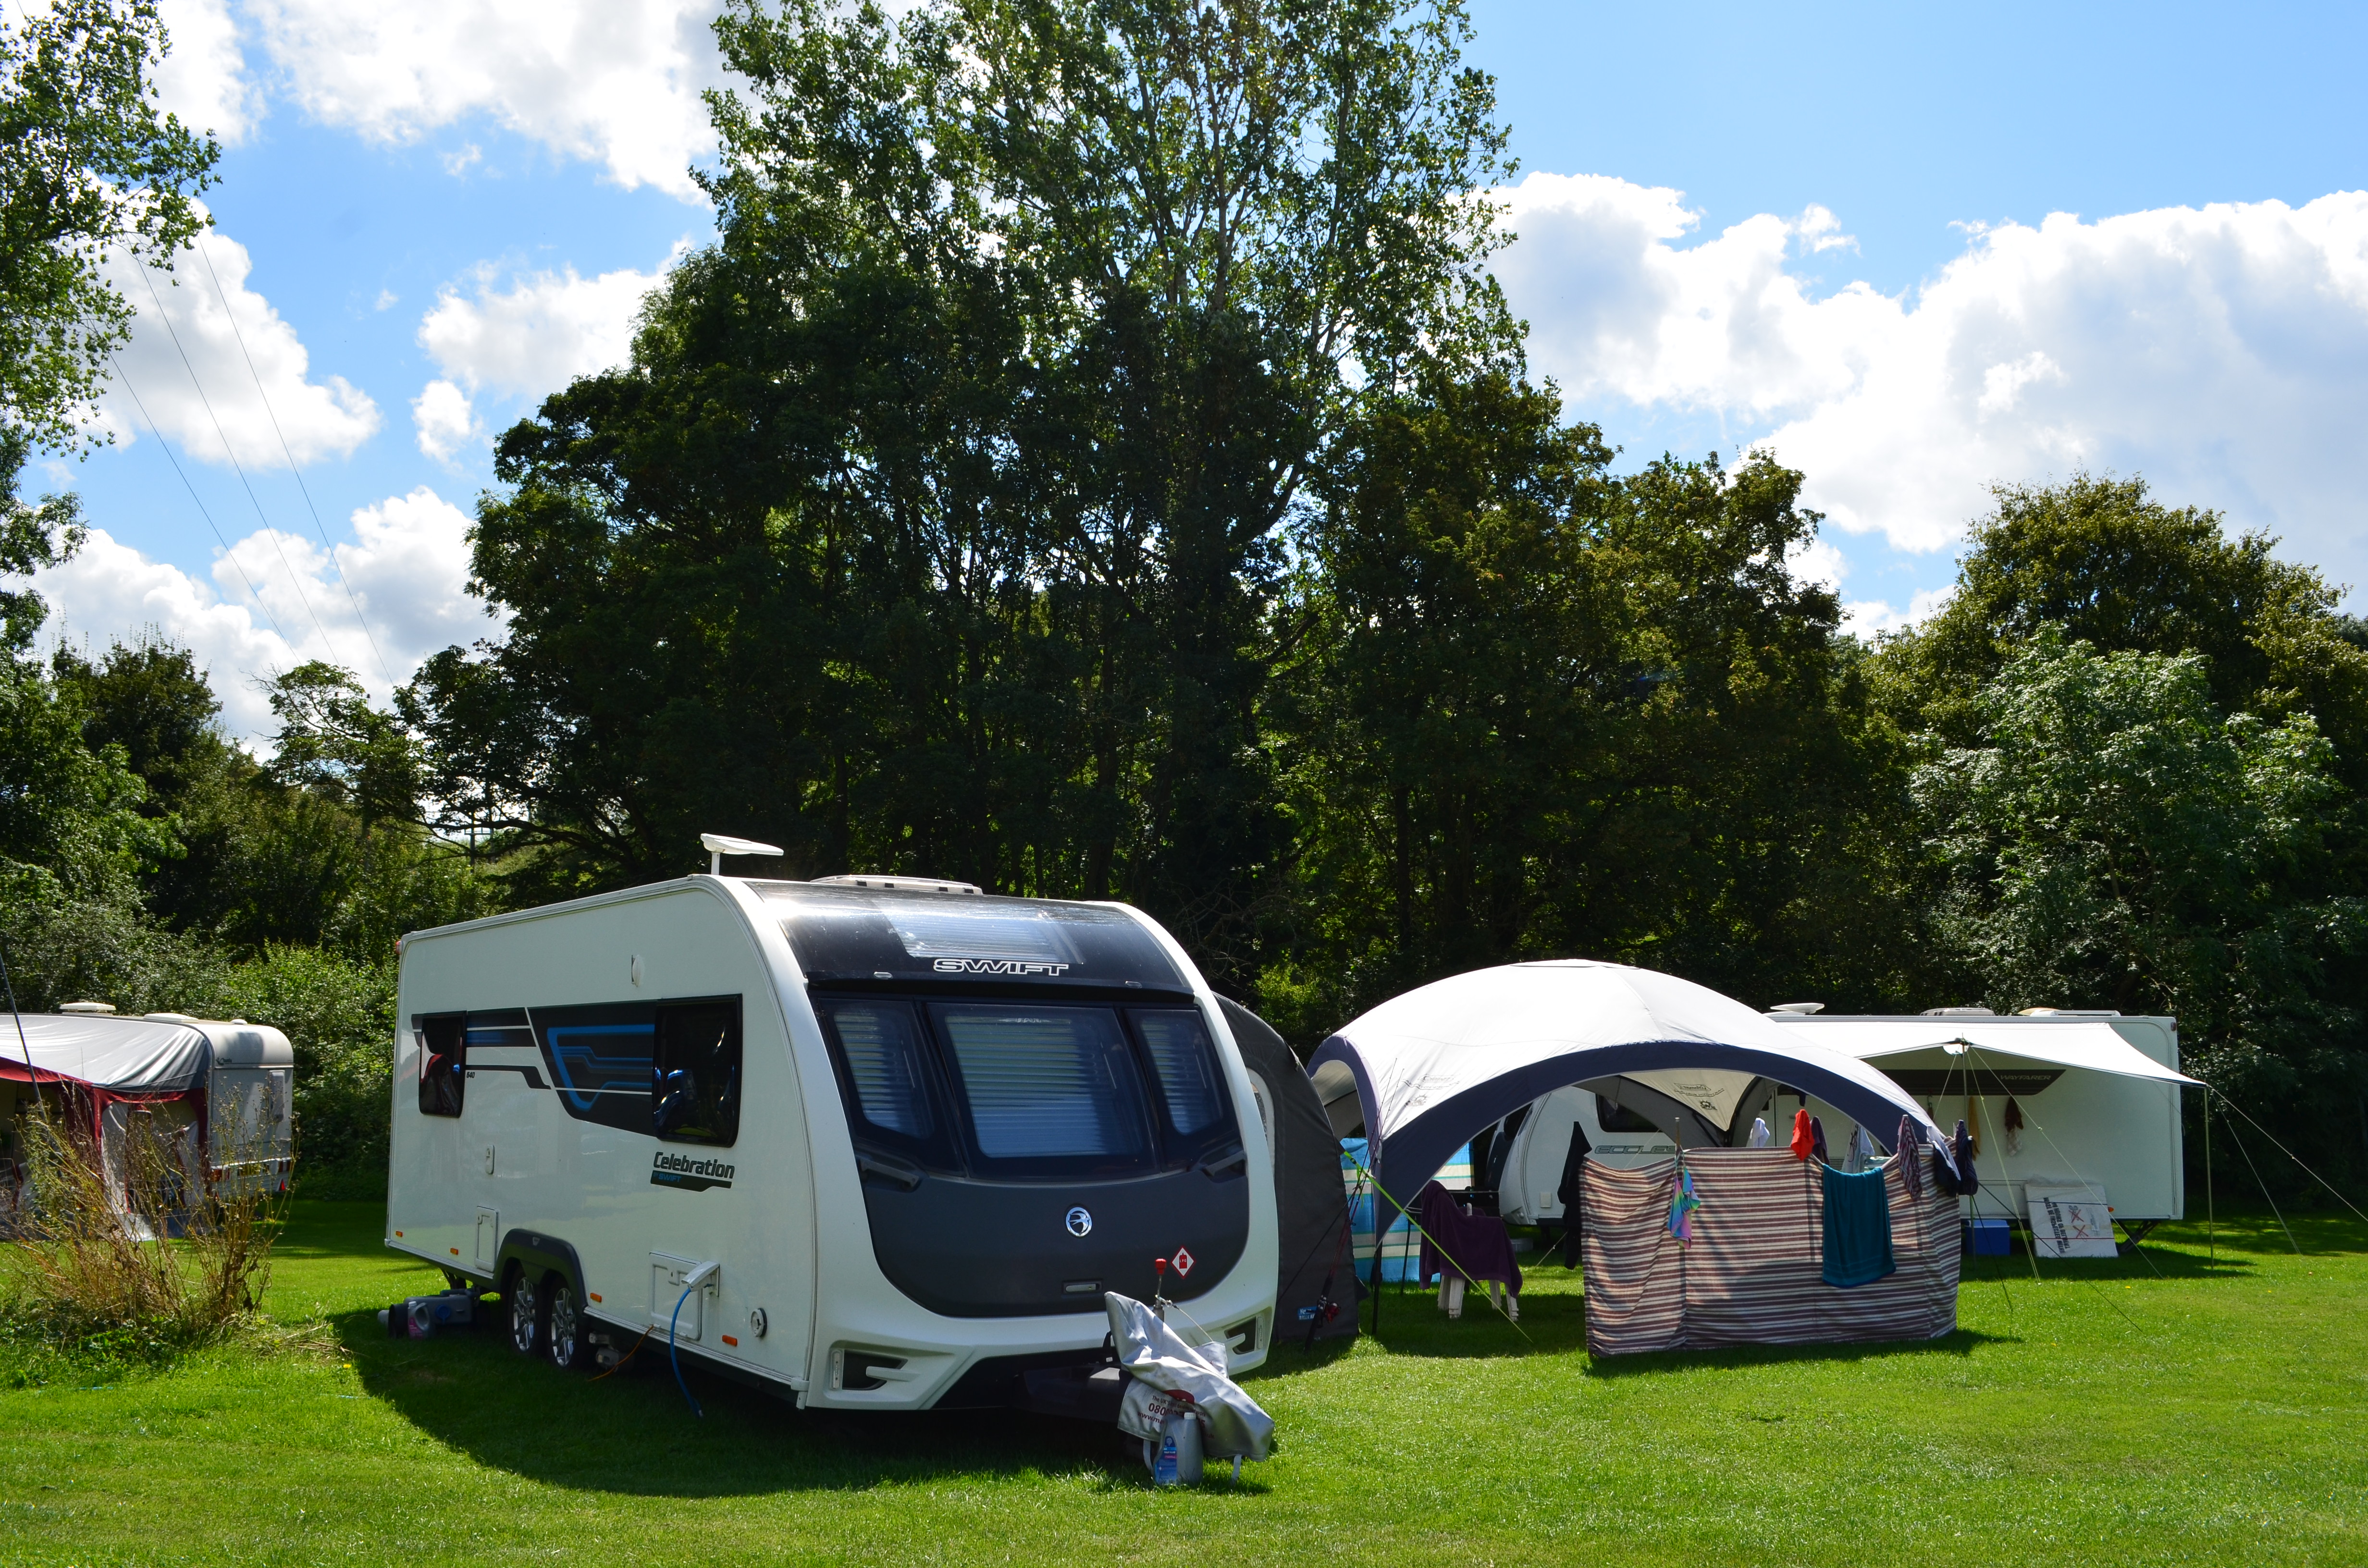 A caravan and tent pitched on a grassy area in front of some mature trees